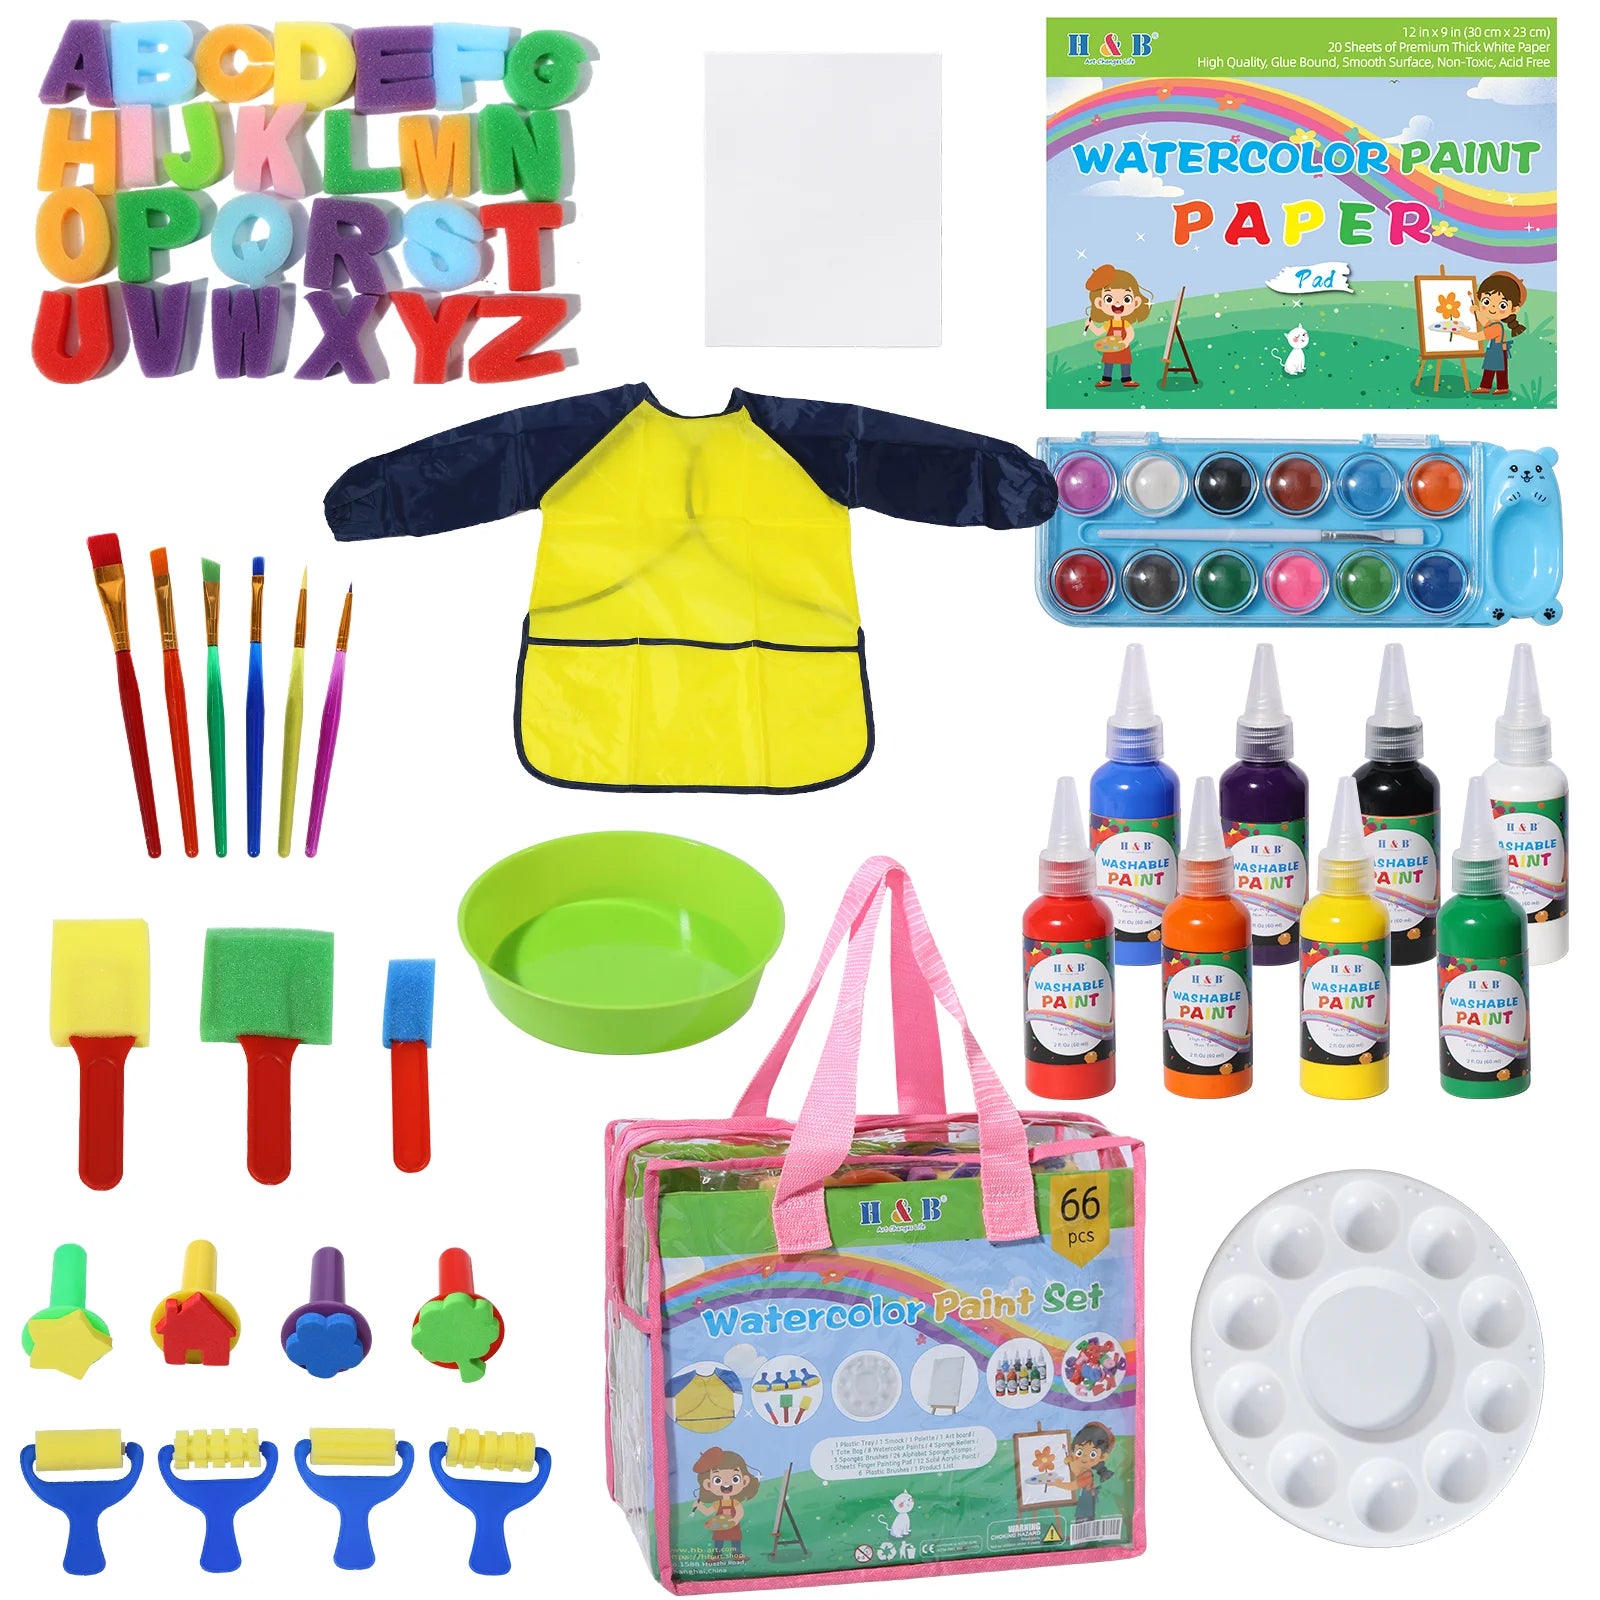 Washable Paint for Kids, 6 Count Finger Paint Set with Waterproof Kids Smock Toddler Painting Supplies Set